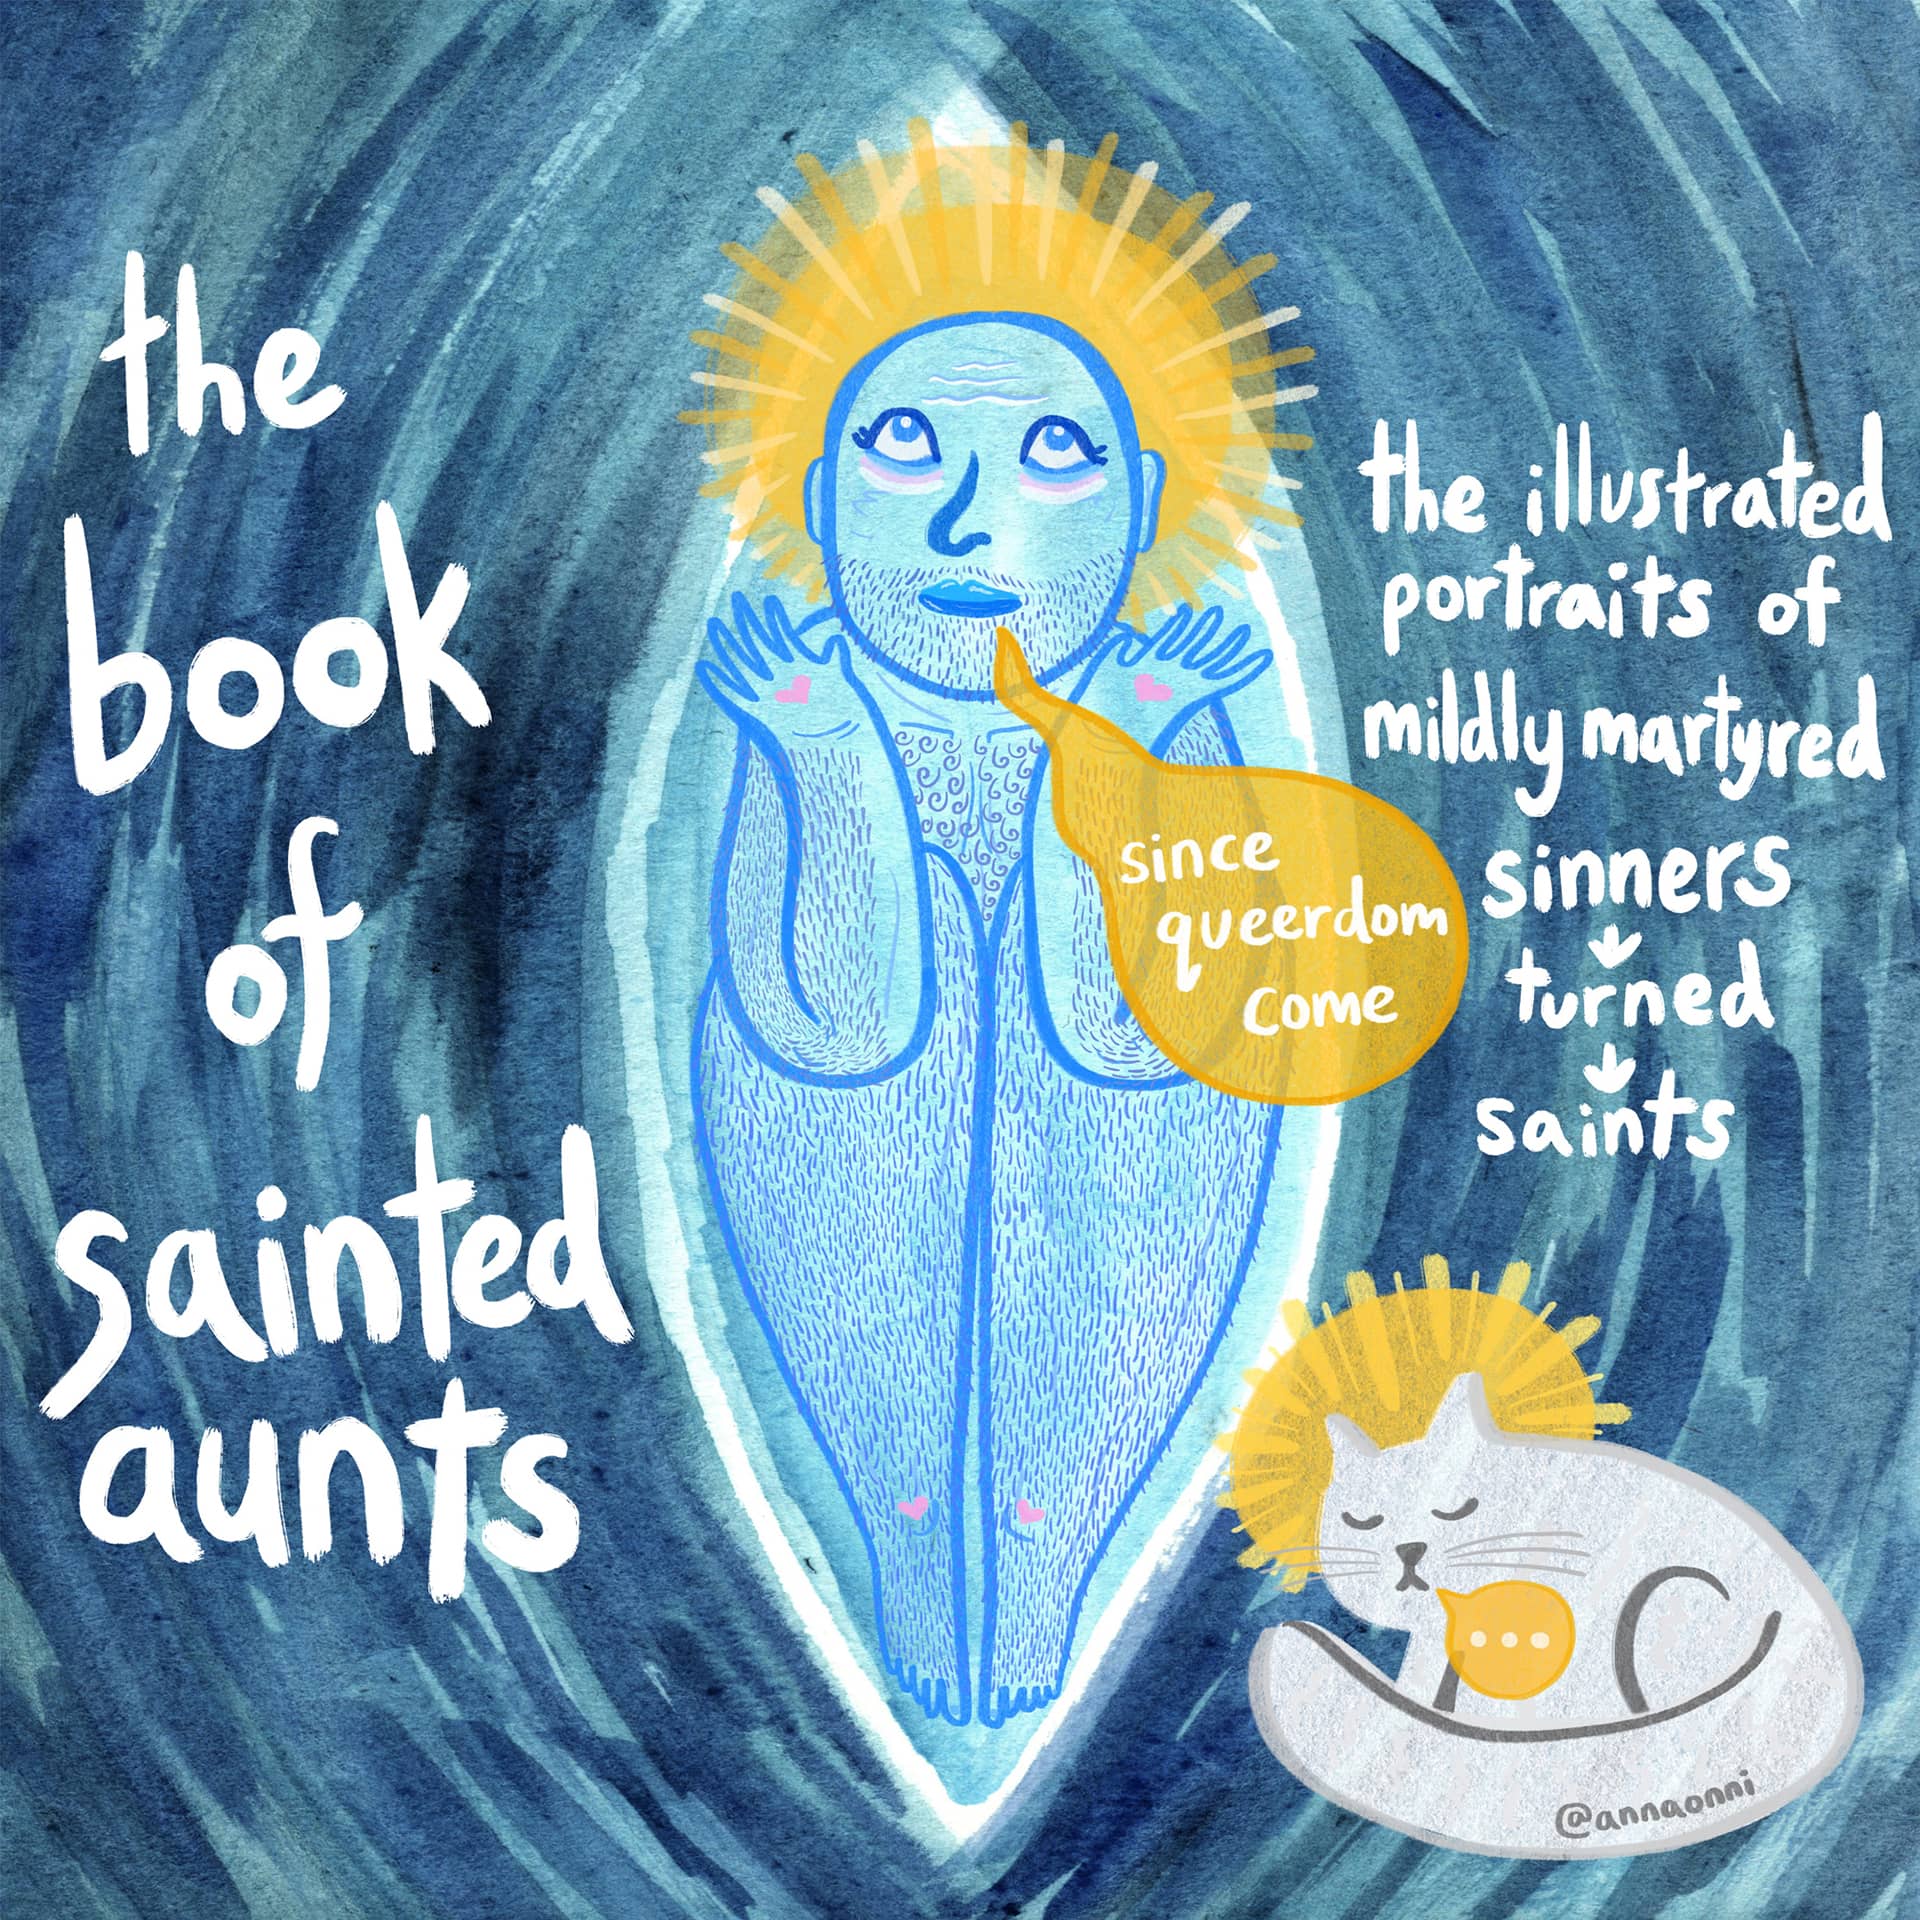 "The Book of Sainted Aunts: The Illustrated Portraits of Mildly Martyred Sinners-Turned-Saints Since Queerdom Come Poster, illustration of a person rendered in blue and with a gold halo, a cat "